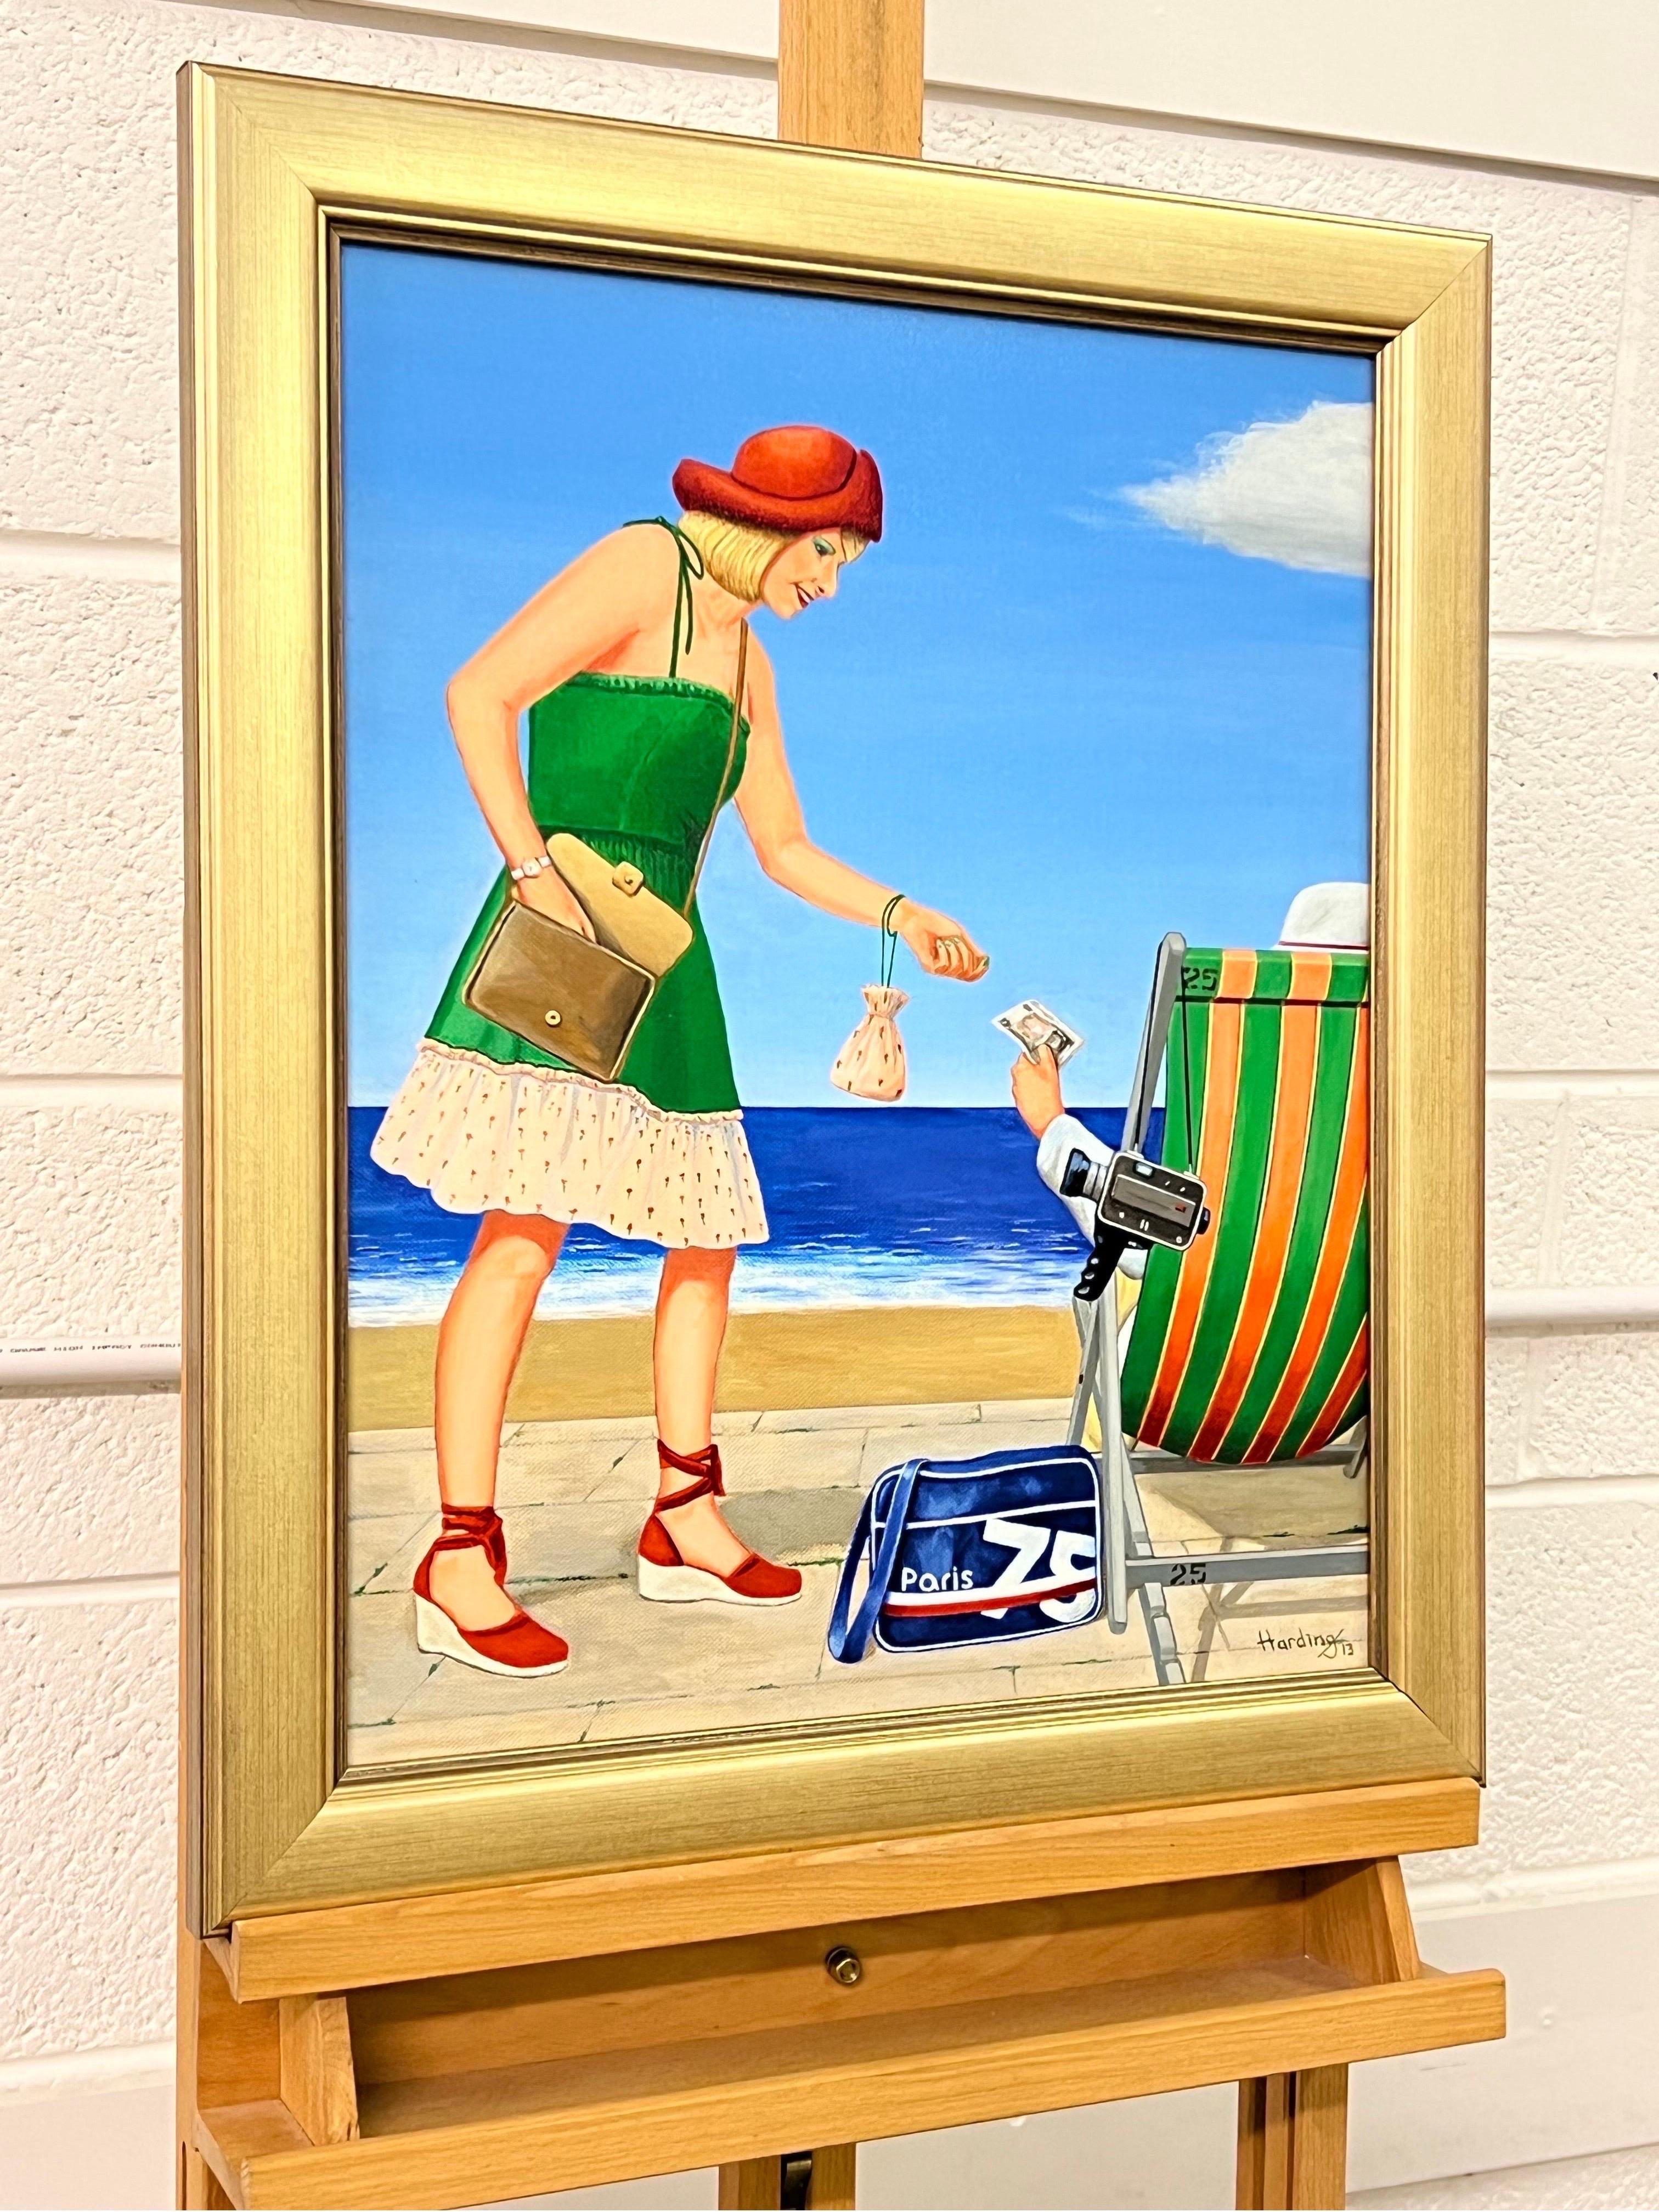 Vintage English Woman at a Seaside Beach Resort in Summer 1960's 1970's England - Painting by Paul F Harding